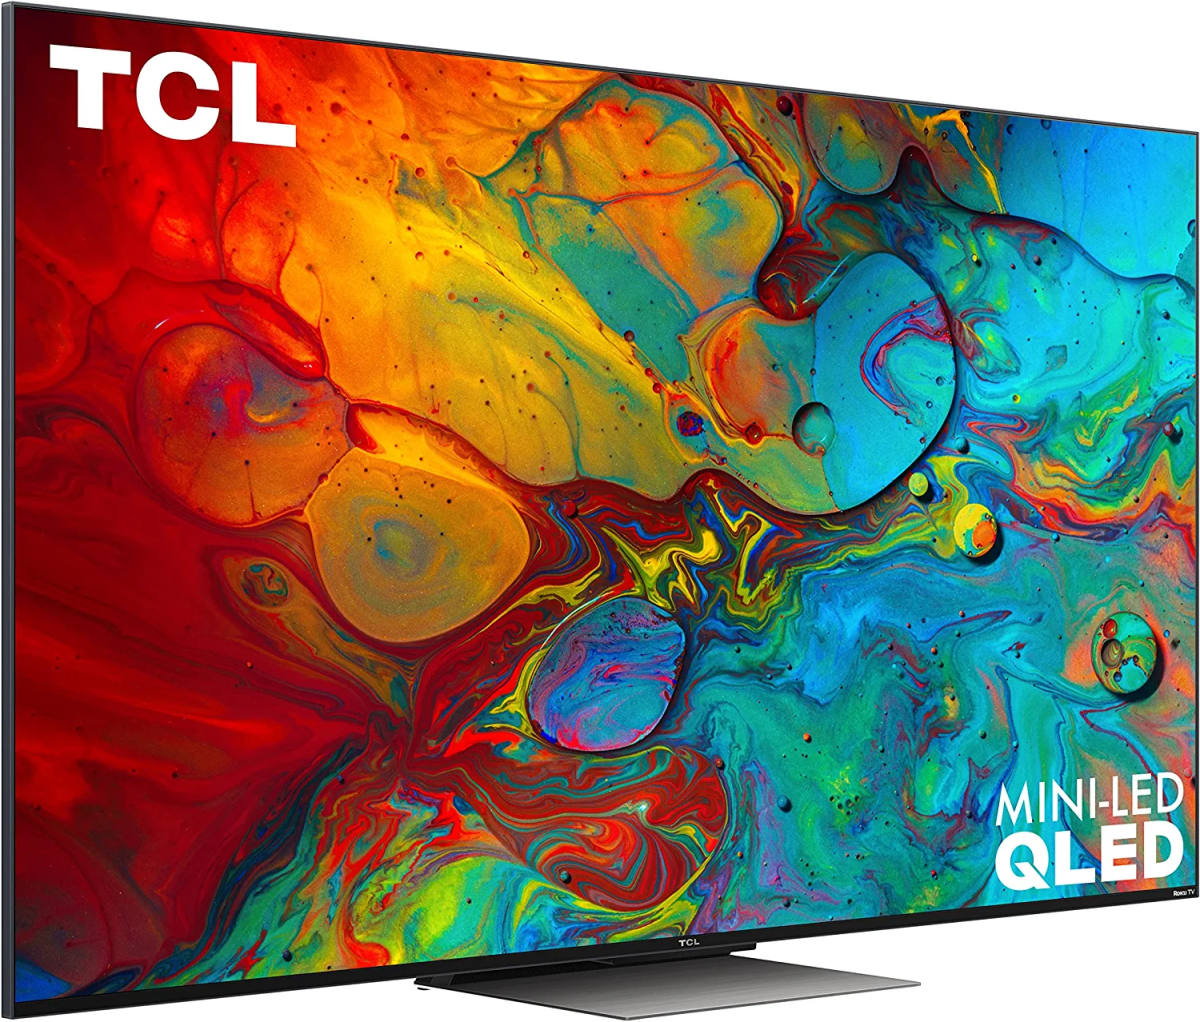 TCL TVs have a reputation for affordability and technological advancements.